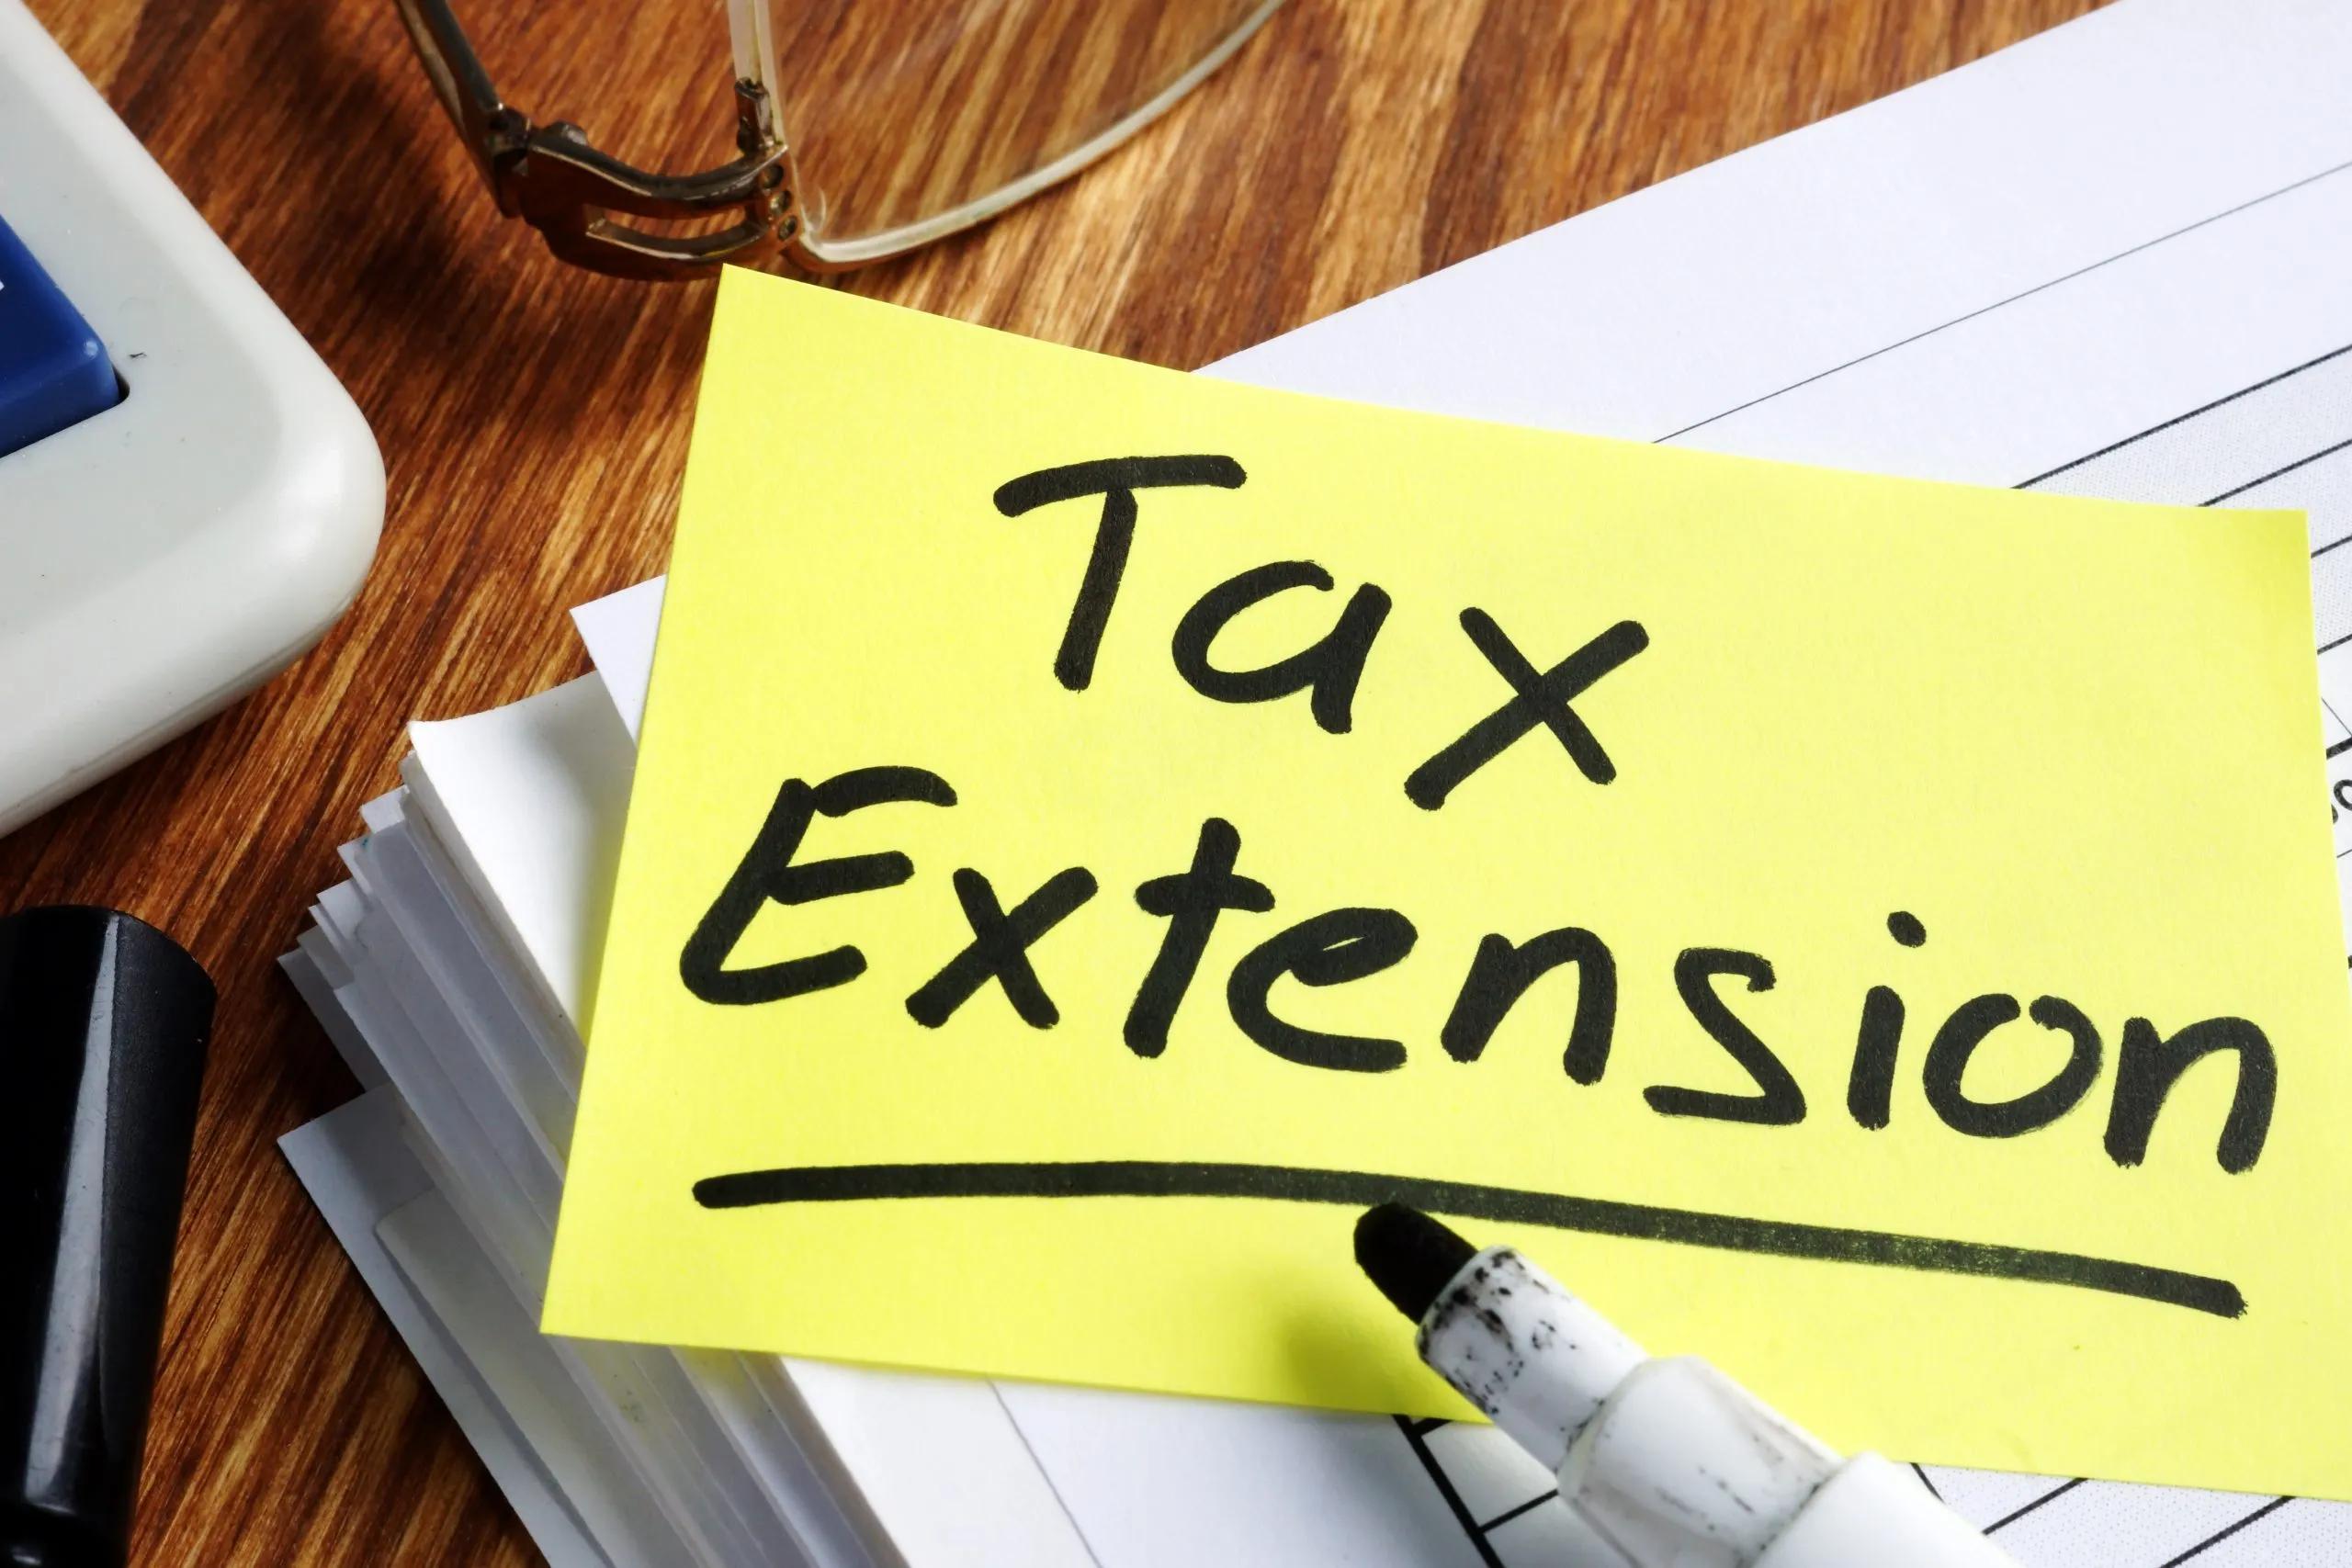 The word "tax extension" written on yellow sticky note